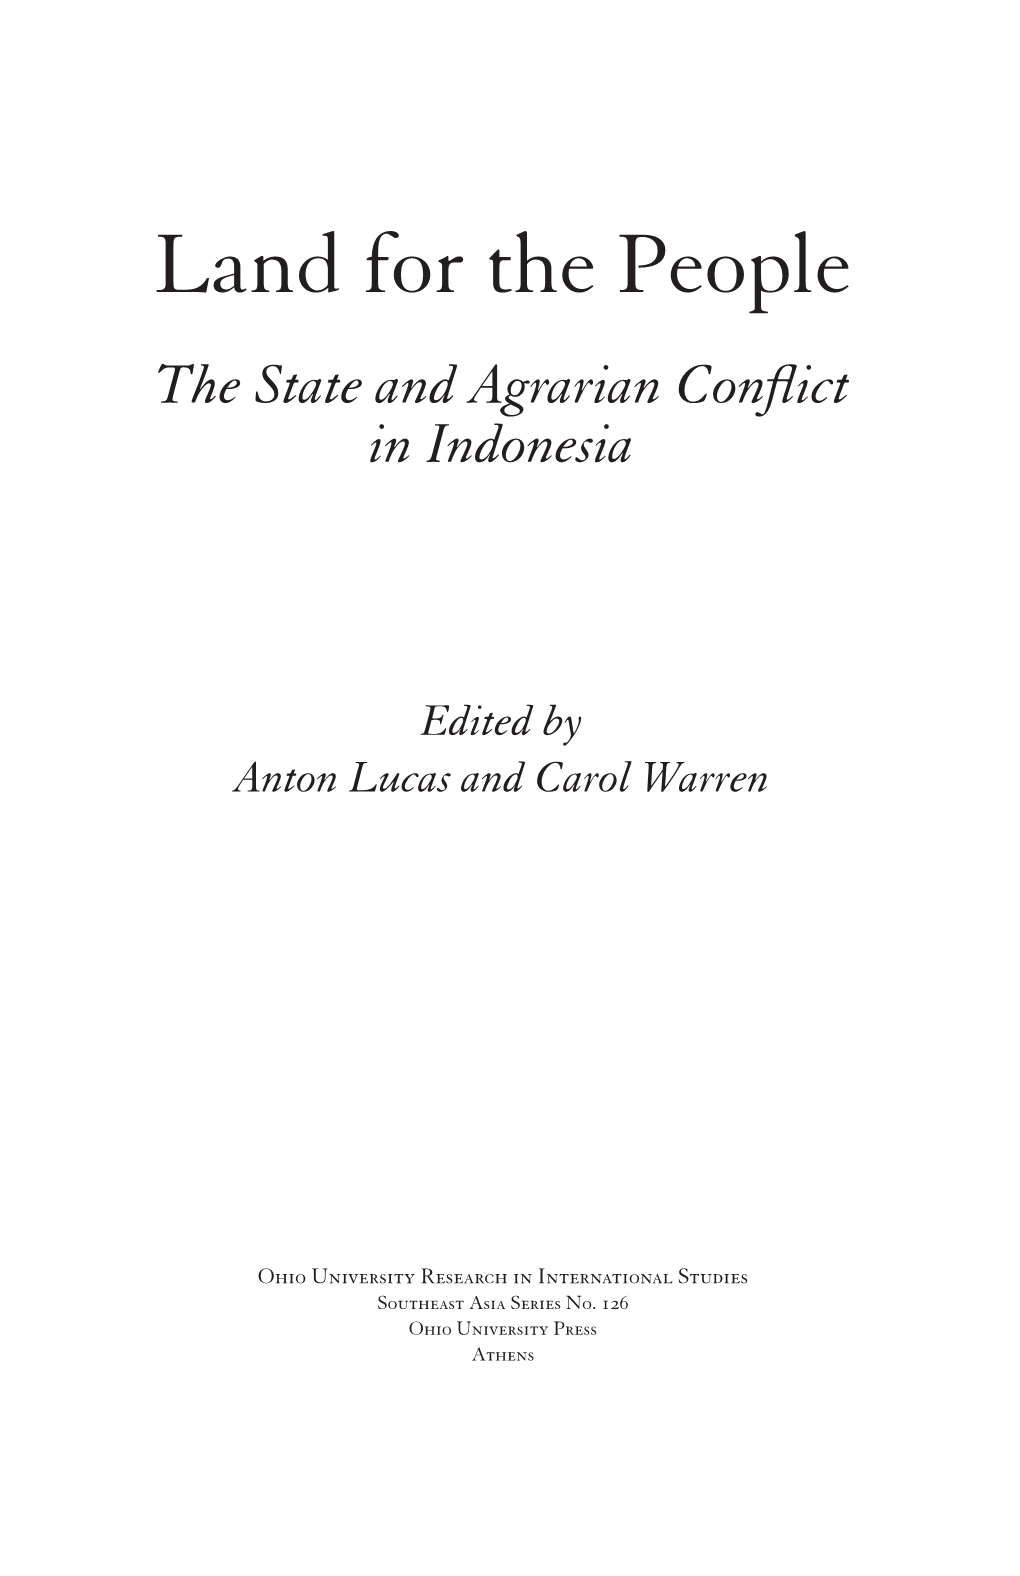 Land for the People: the State and Agrarian Conflict in Indonesia